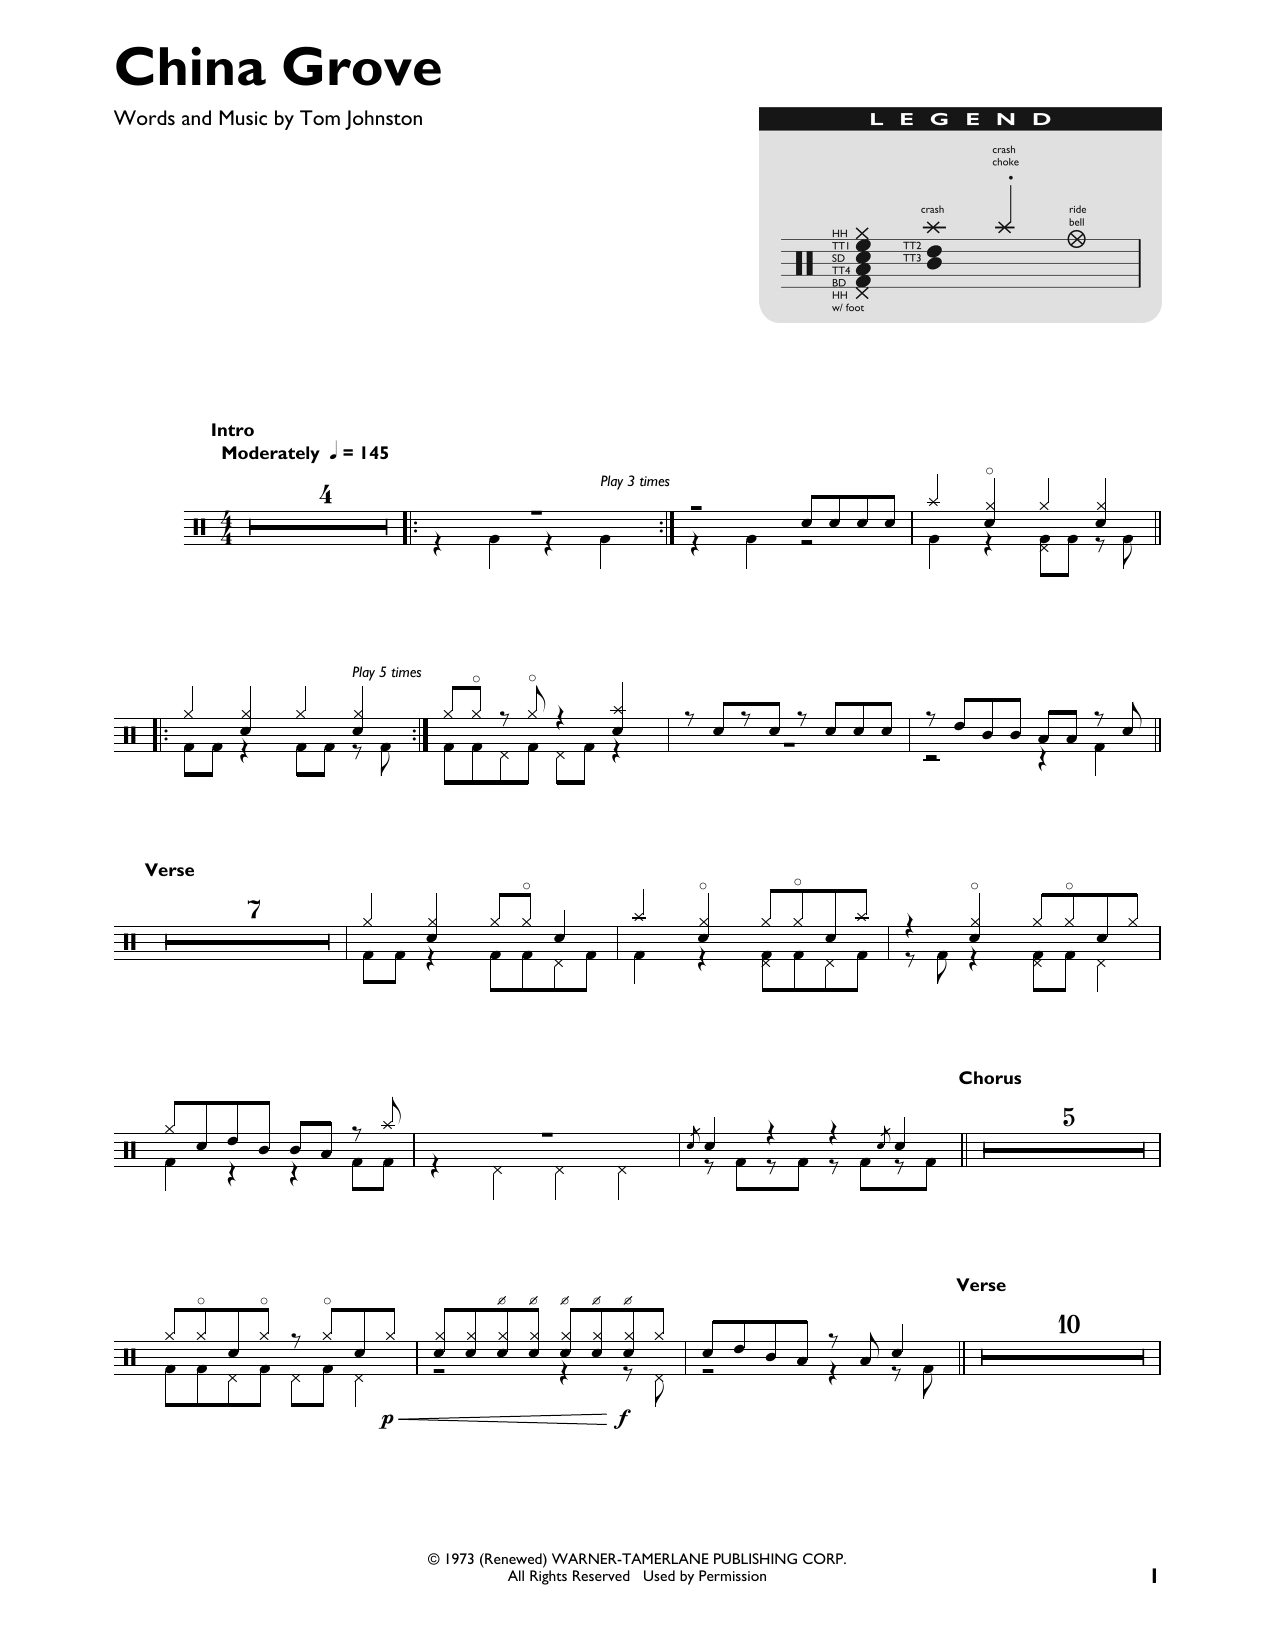 Download The Doobie Brothers China Grove Sheet Music